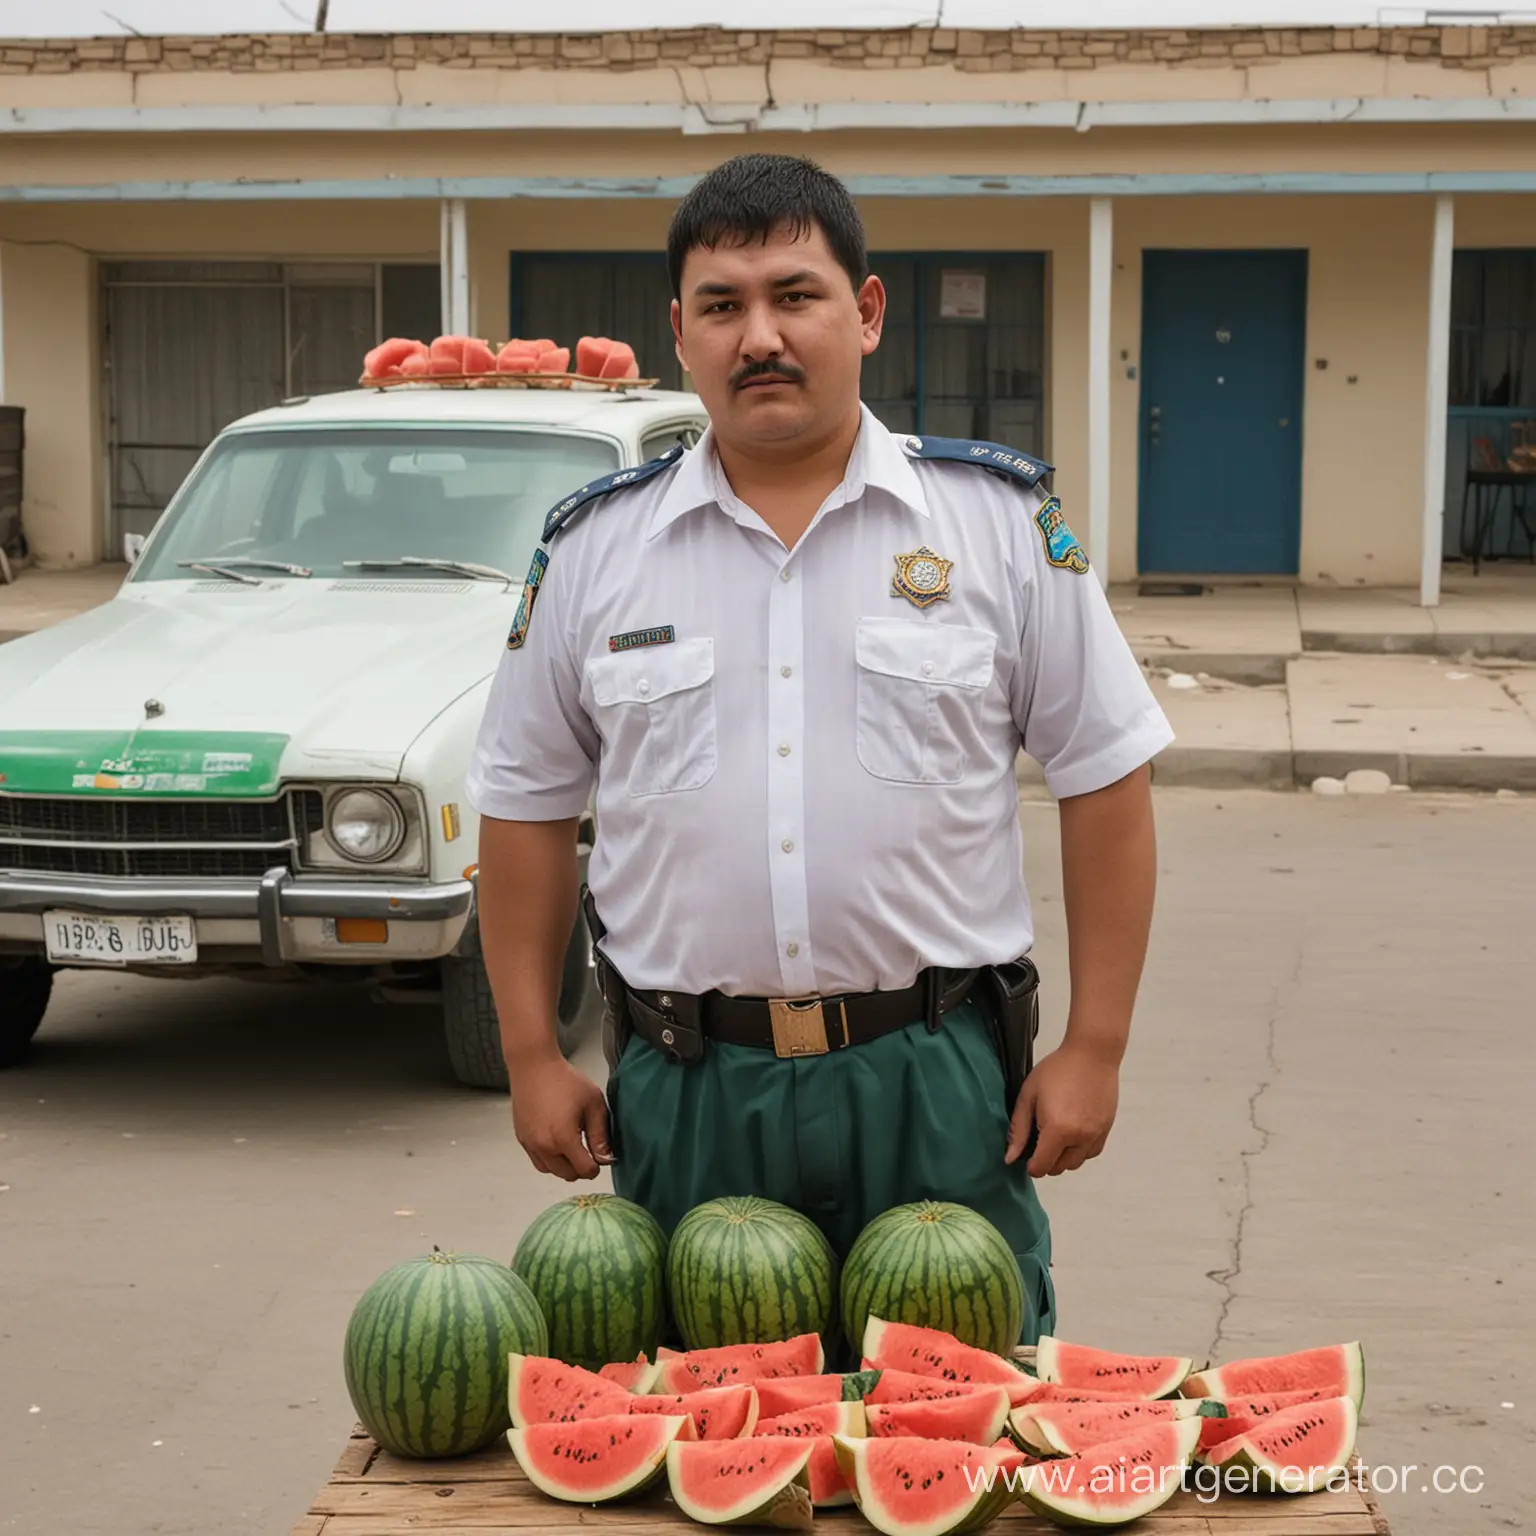 Uzbek-Watermelon-Vendor-by-Police-Department-with-Thunder-Sign-and-White-Chevrolet